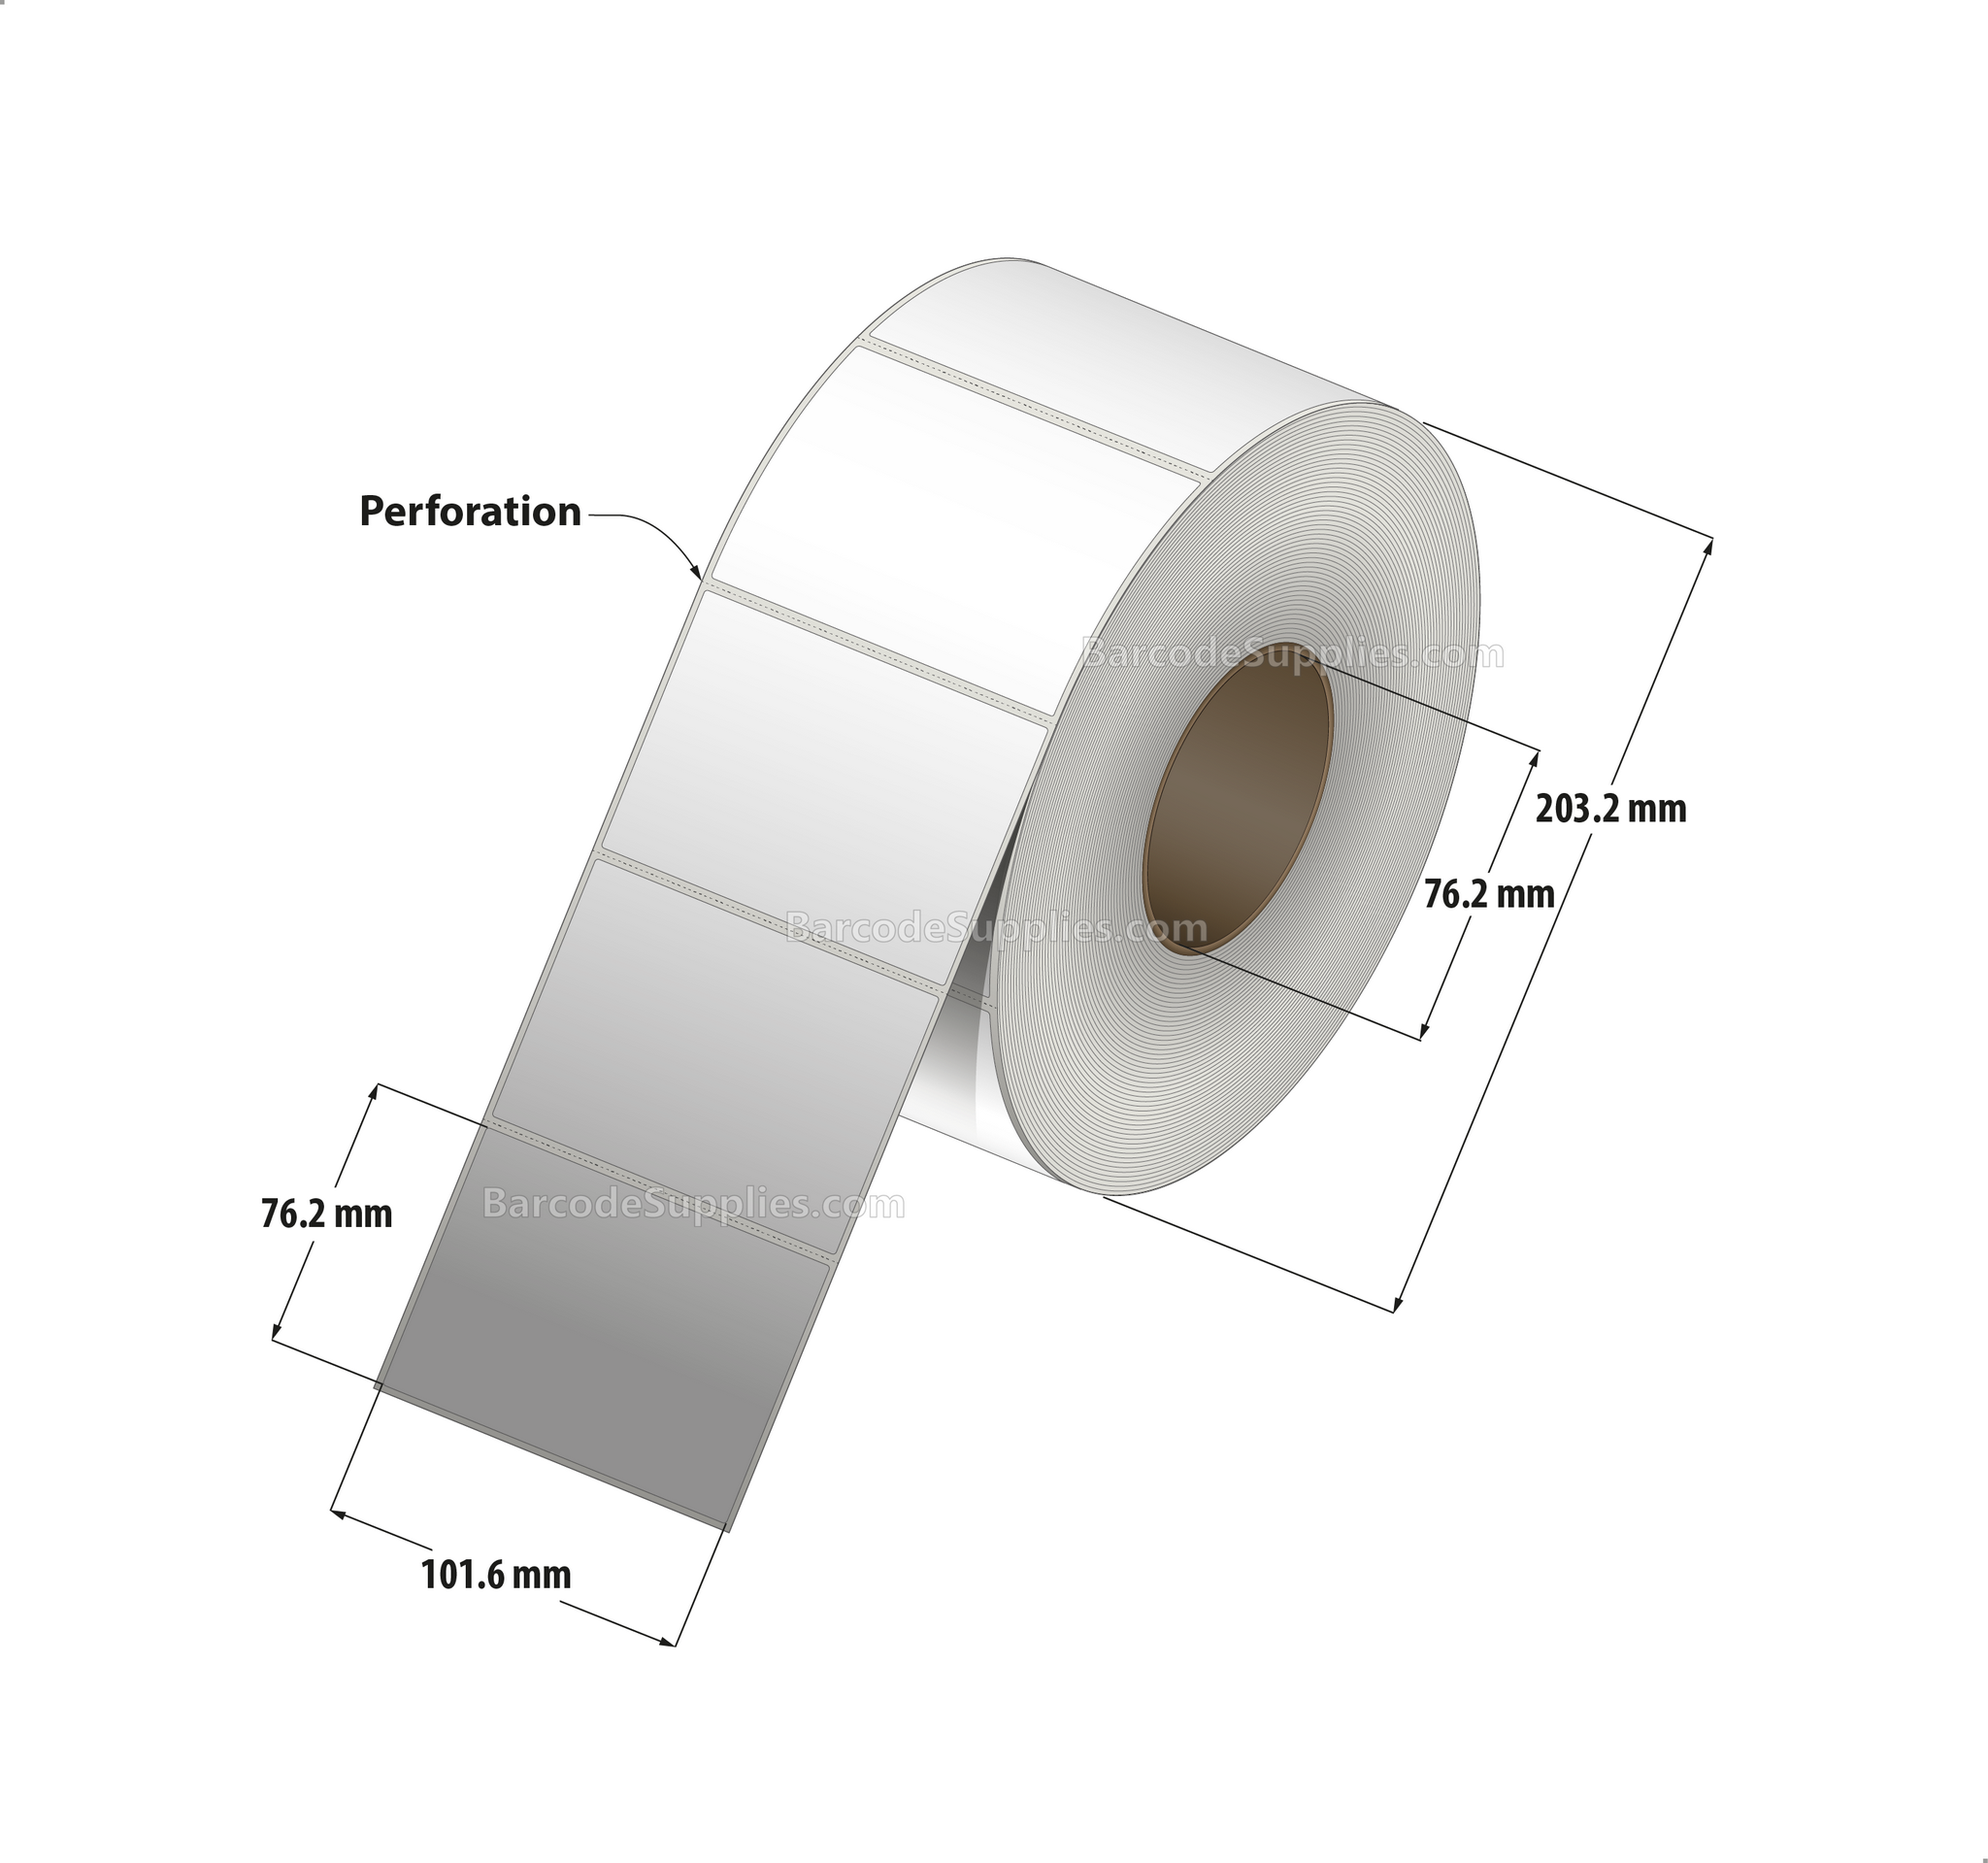 4 x 3 Direct Thermal White Labels With Rubber Adhesive - Perforated - 2000 Labels Per Roll - Carton Of 4 Rolls - 8000 Labels Total - MPN: DT400300-3P